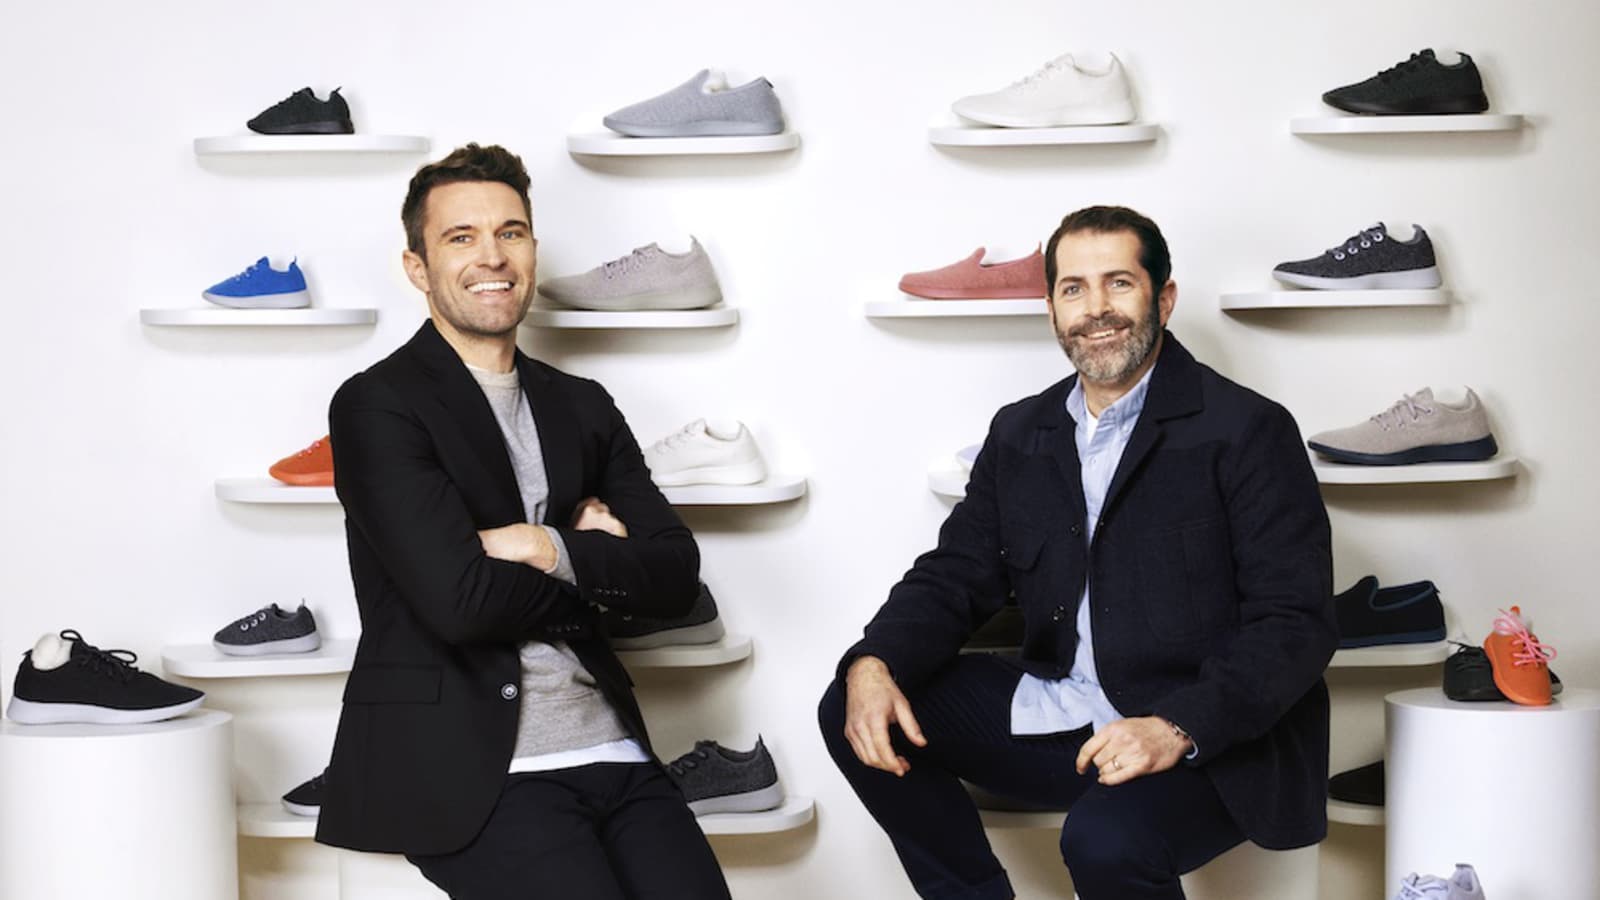 Allbirds (BIRD): A Look at the Company's Recent Challenges and Transformation Plan